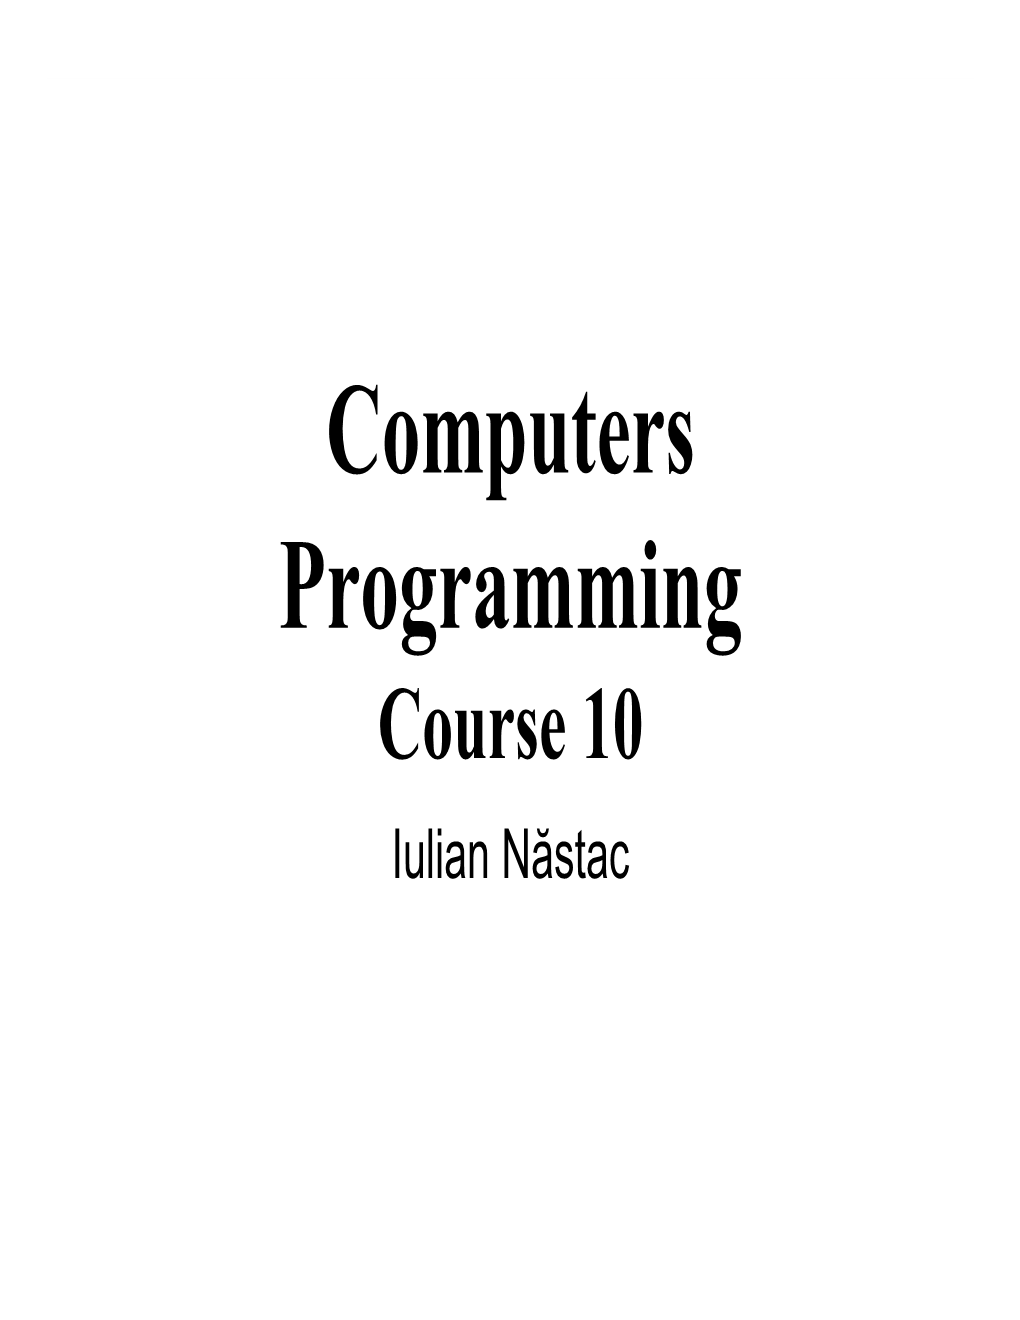 Computers Programming Course 10 Iulian Năstac Recap from Previous Course 4